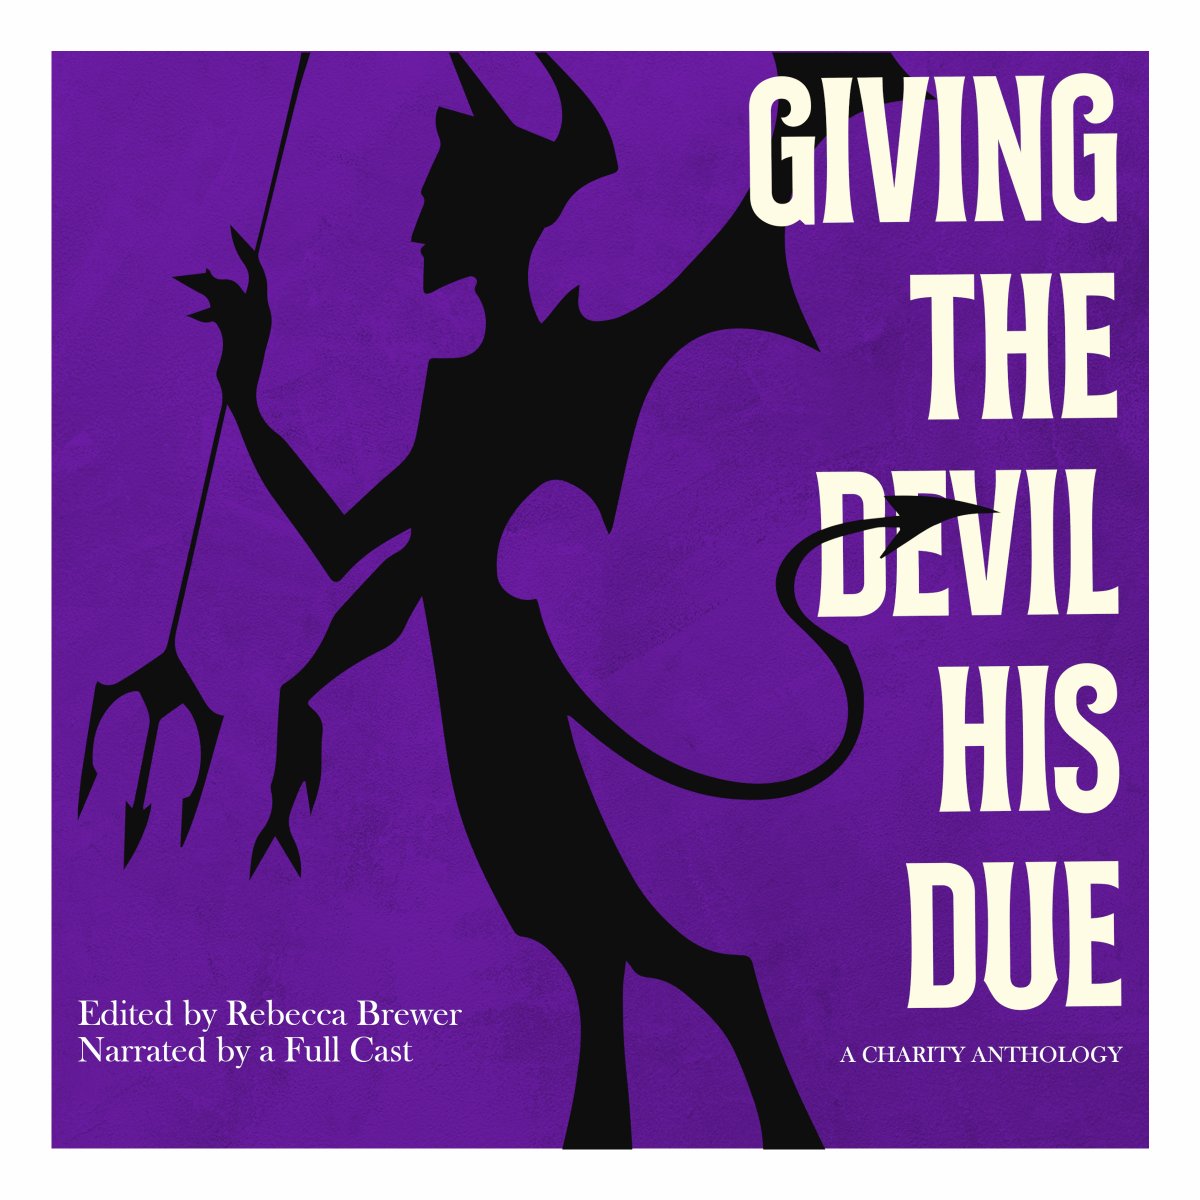 Pls RT: The Audie Award nominated audiobook of our charity anthology Giving The Devil His Due is a Bonus Borrow on Hoopla throughout June 2023 - it's a great opportunity to try it while proceeds support our work to end #VAW bit.ly/3ZSfMPE | @danacmrn #Read4Pixels